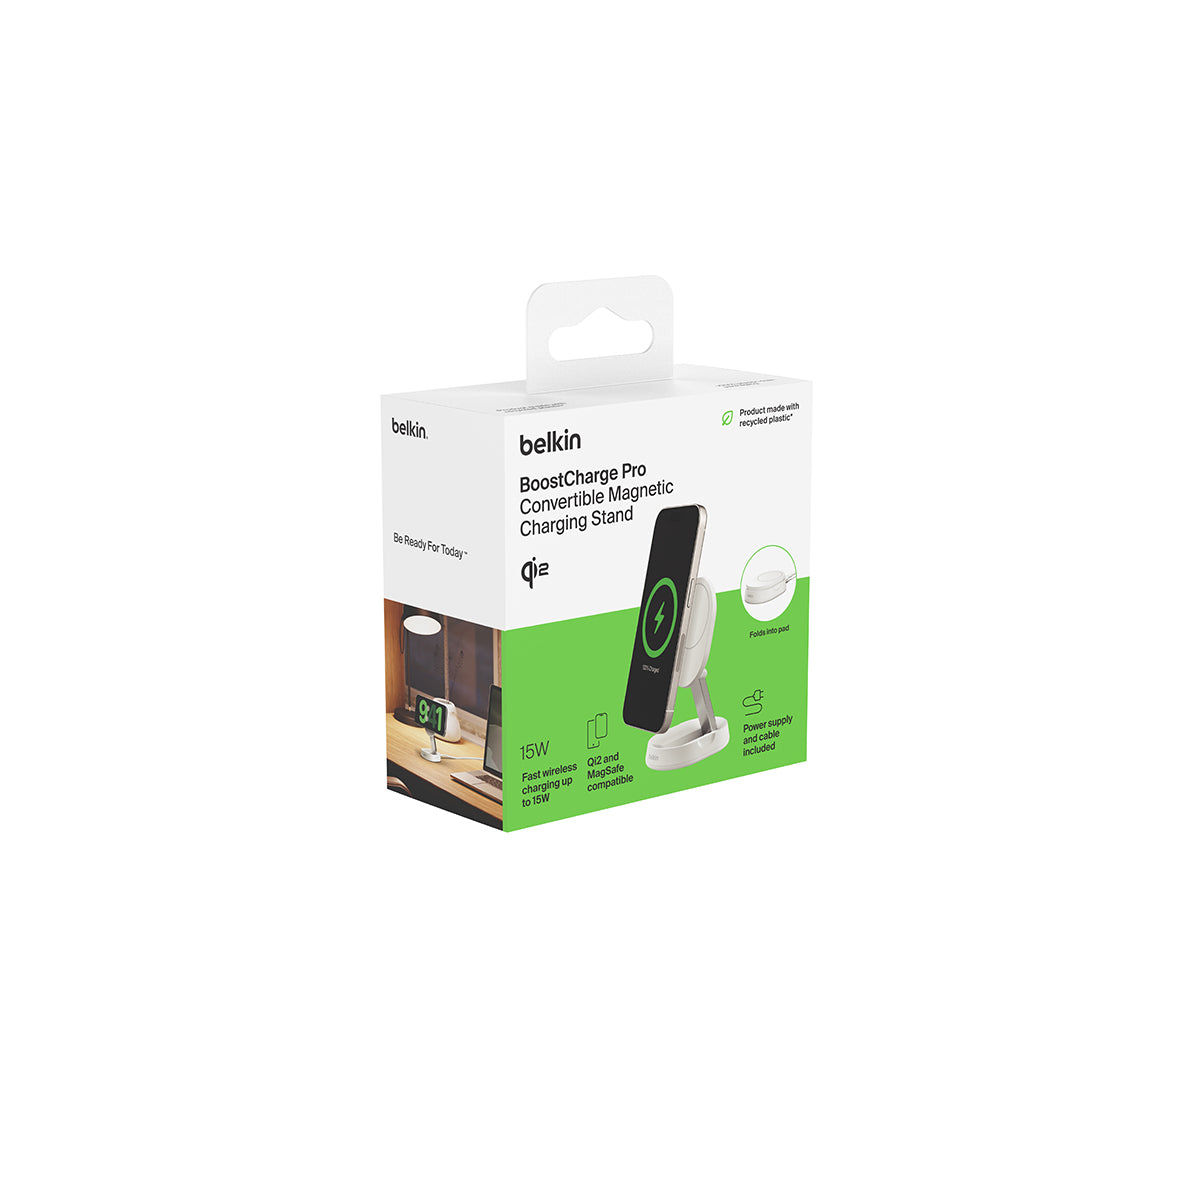 Belkin BoostCharge Pro -   Convertible Magnetic Charging Stand with Qi2 - White-4